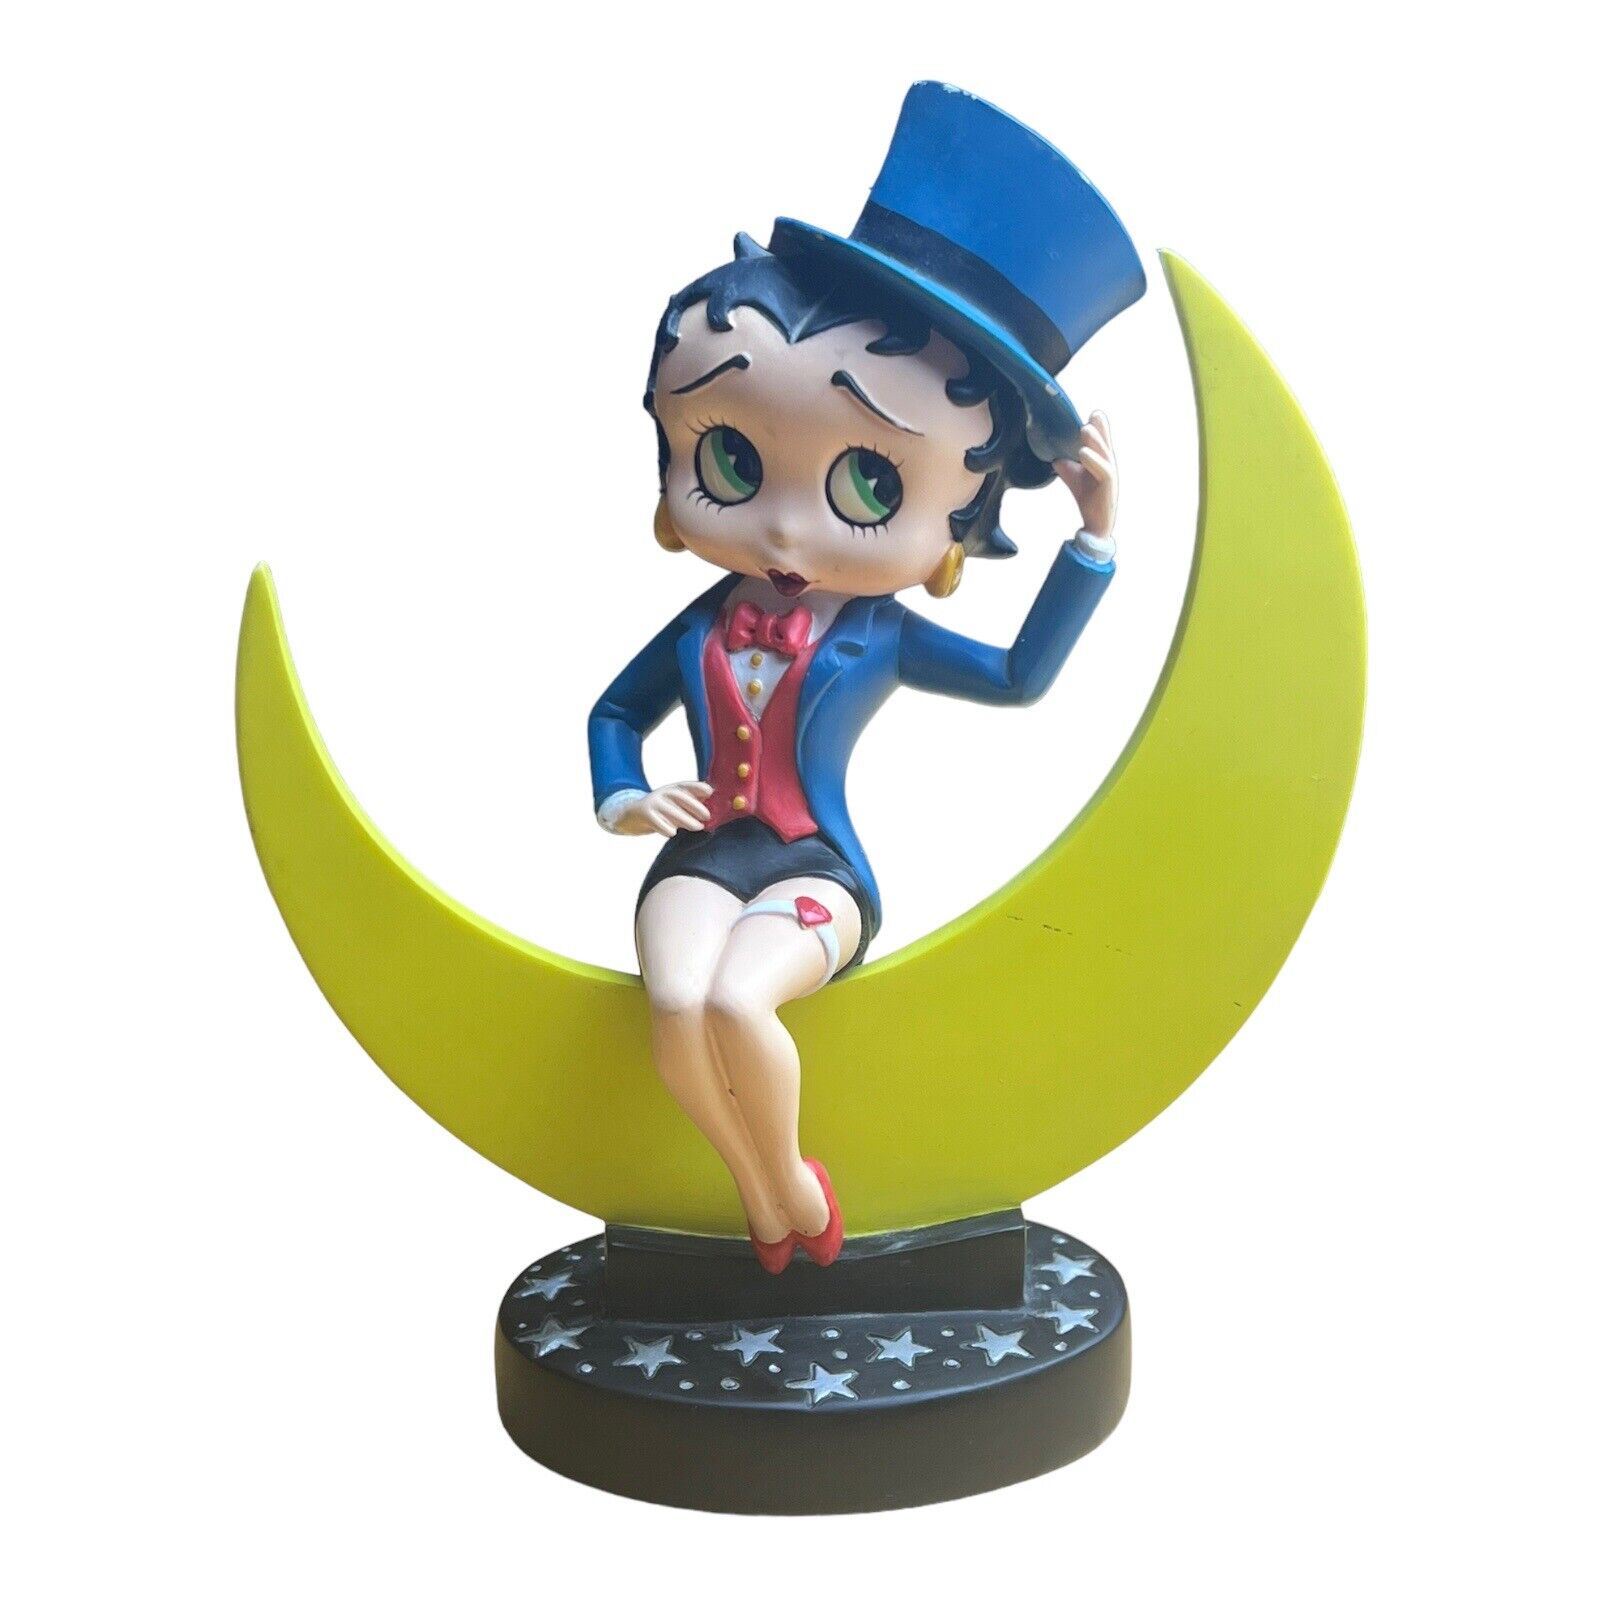 Betty Boop Moonglow Statue by The Danbury Mint